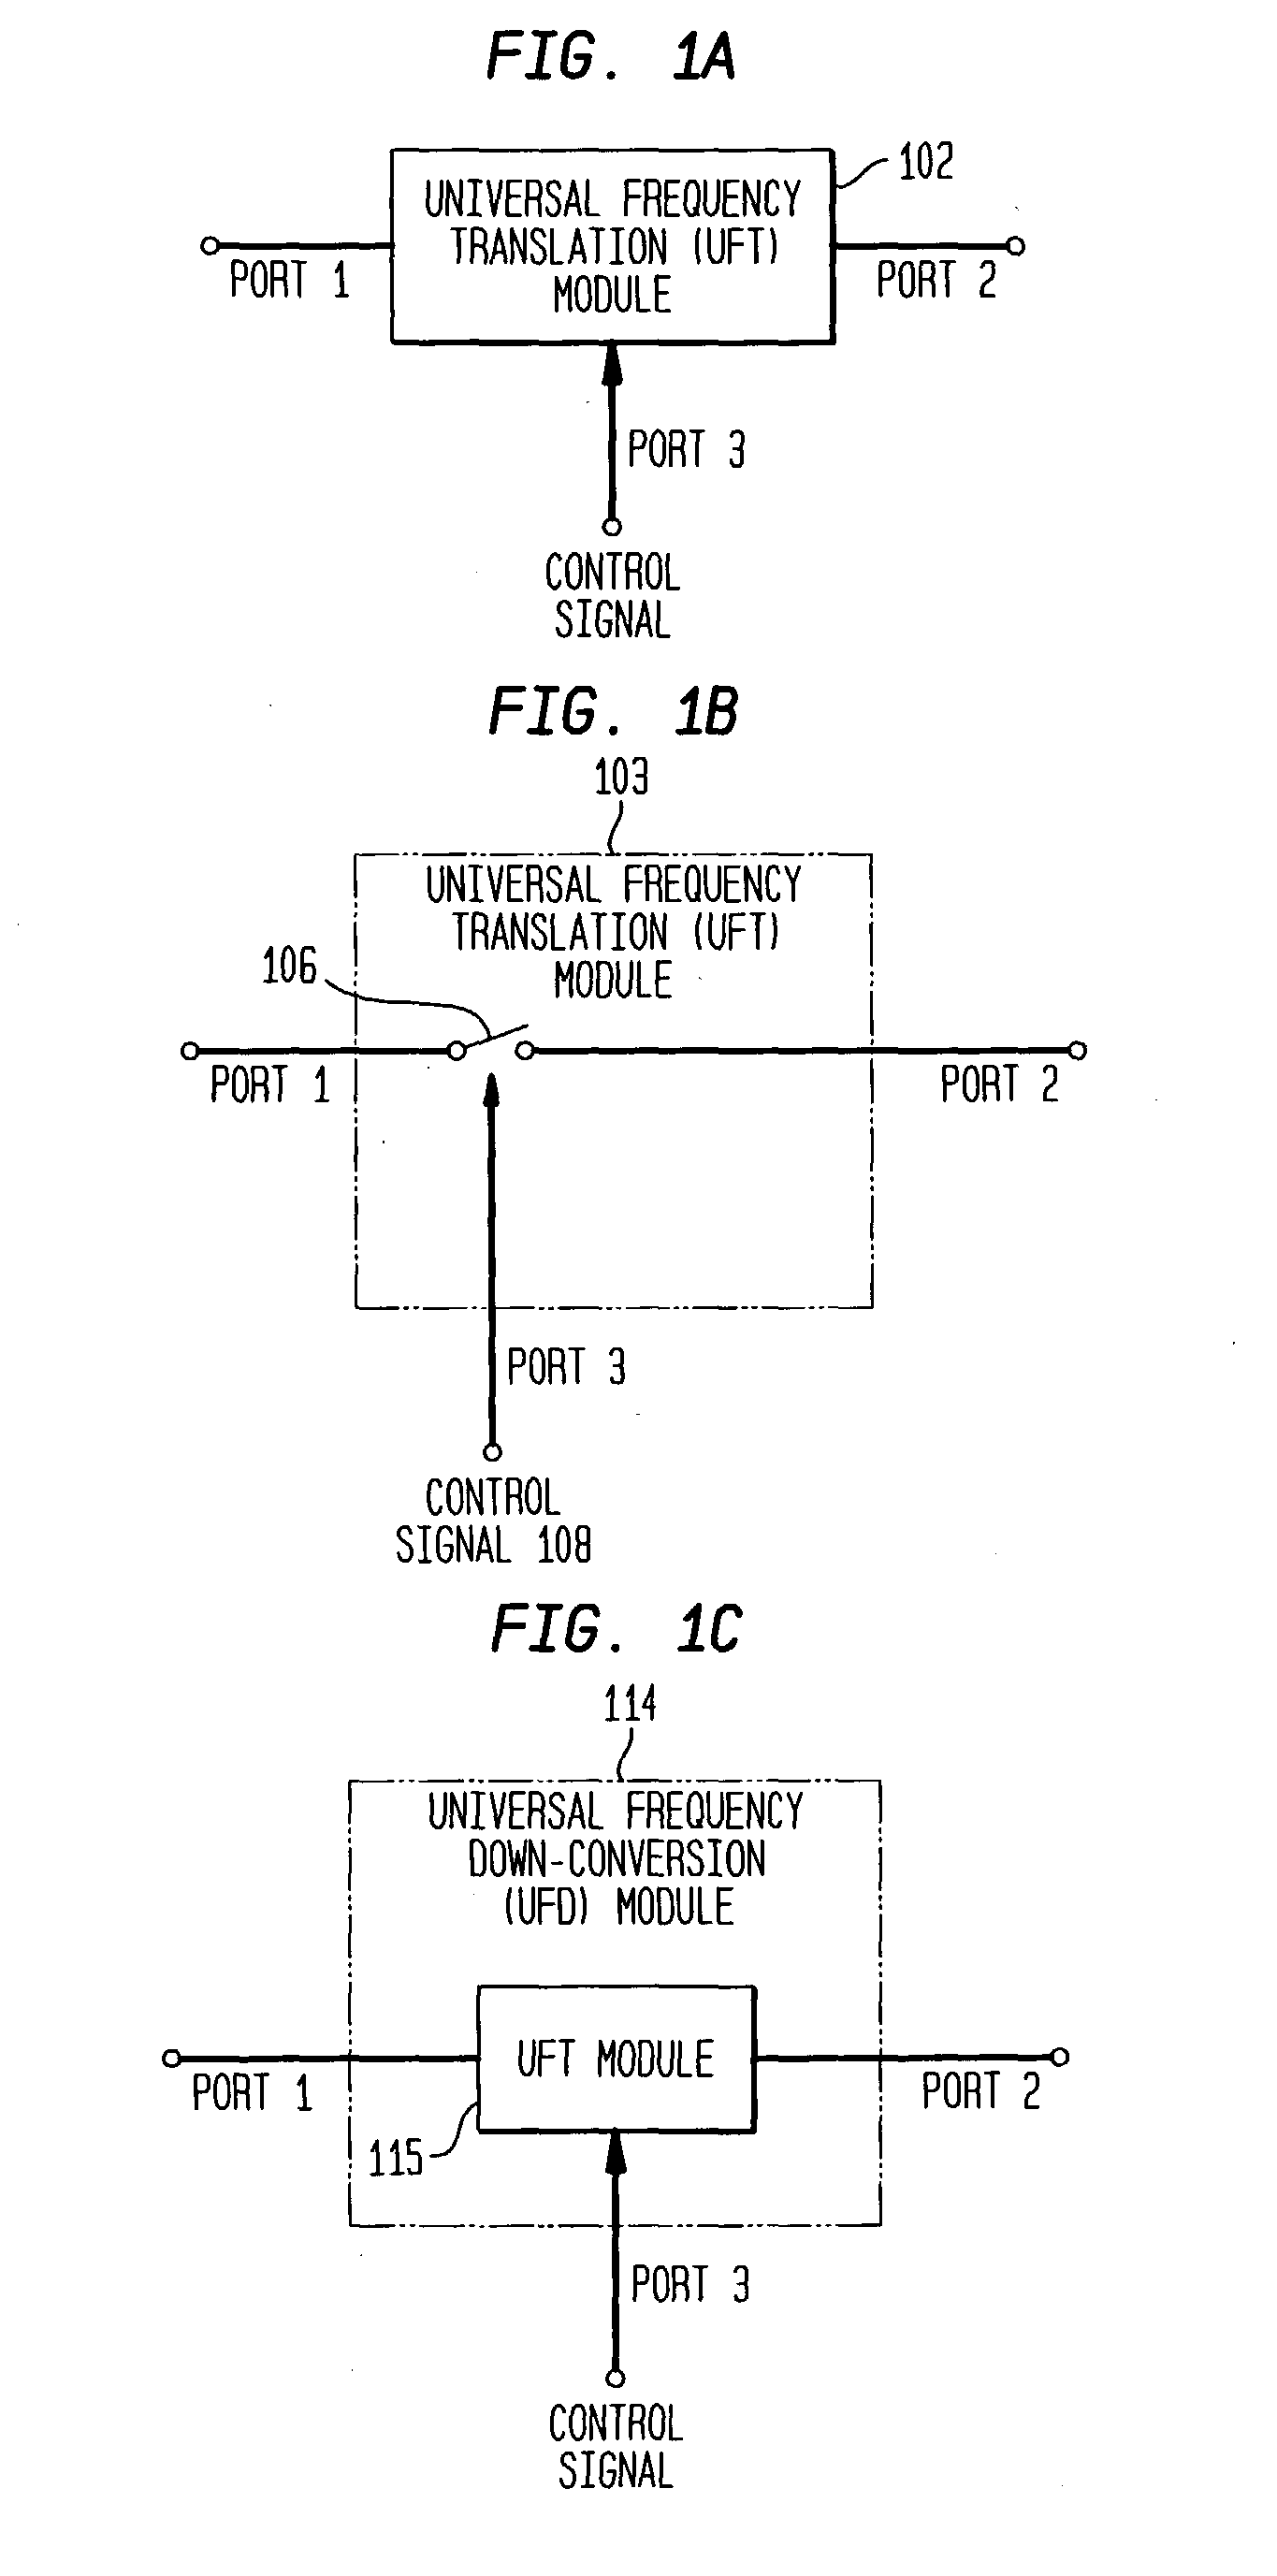 Method and apparatus for reducing DC offsets in communication systems using universal frequency translation technology